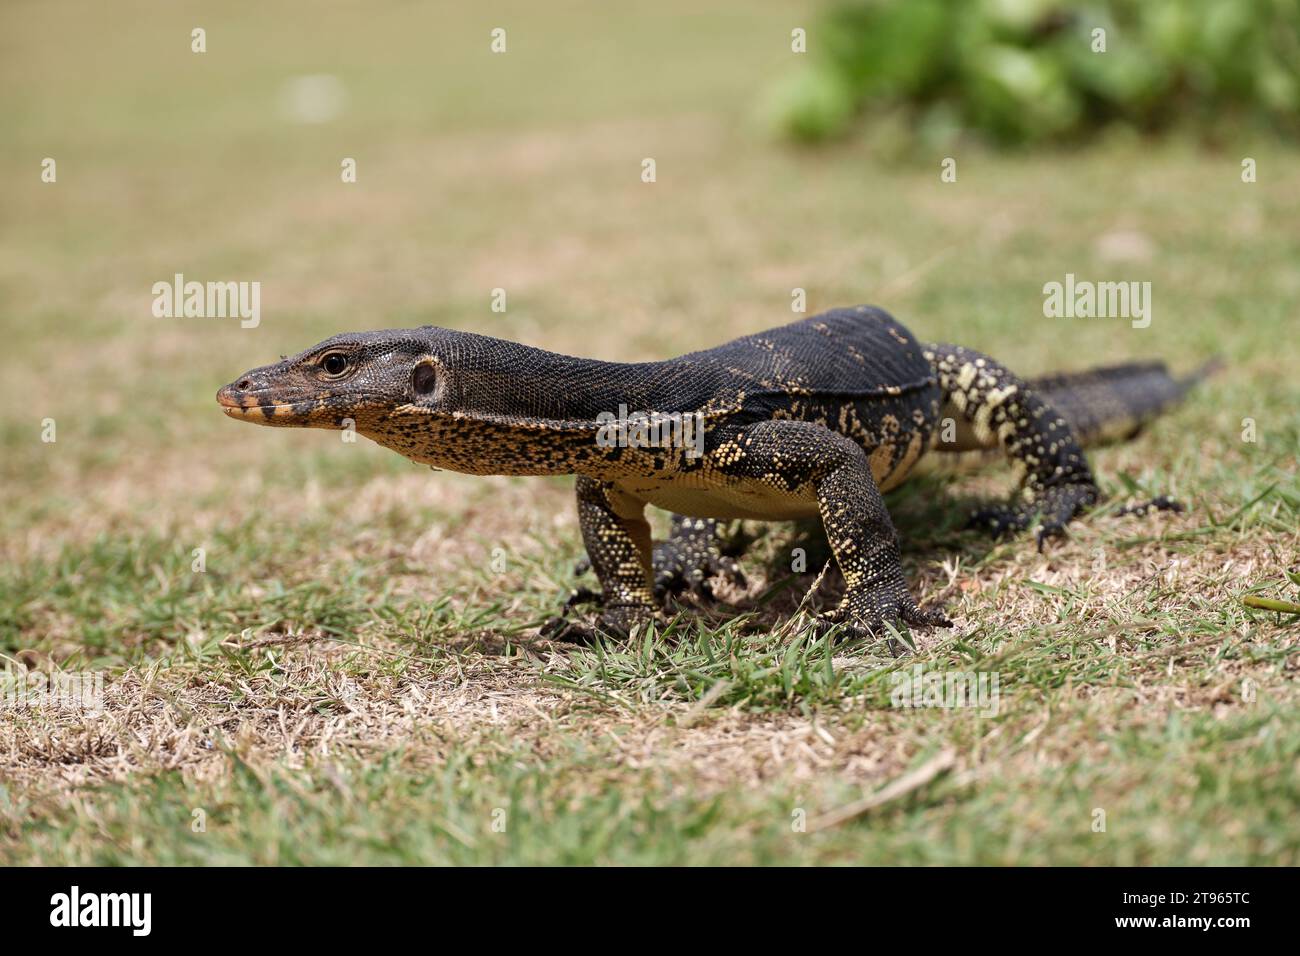 Portrait of a striped monitor lizard or water monitor (Varanus salvator) on a grass Stock Photo